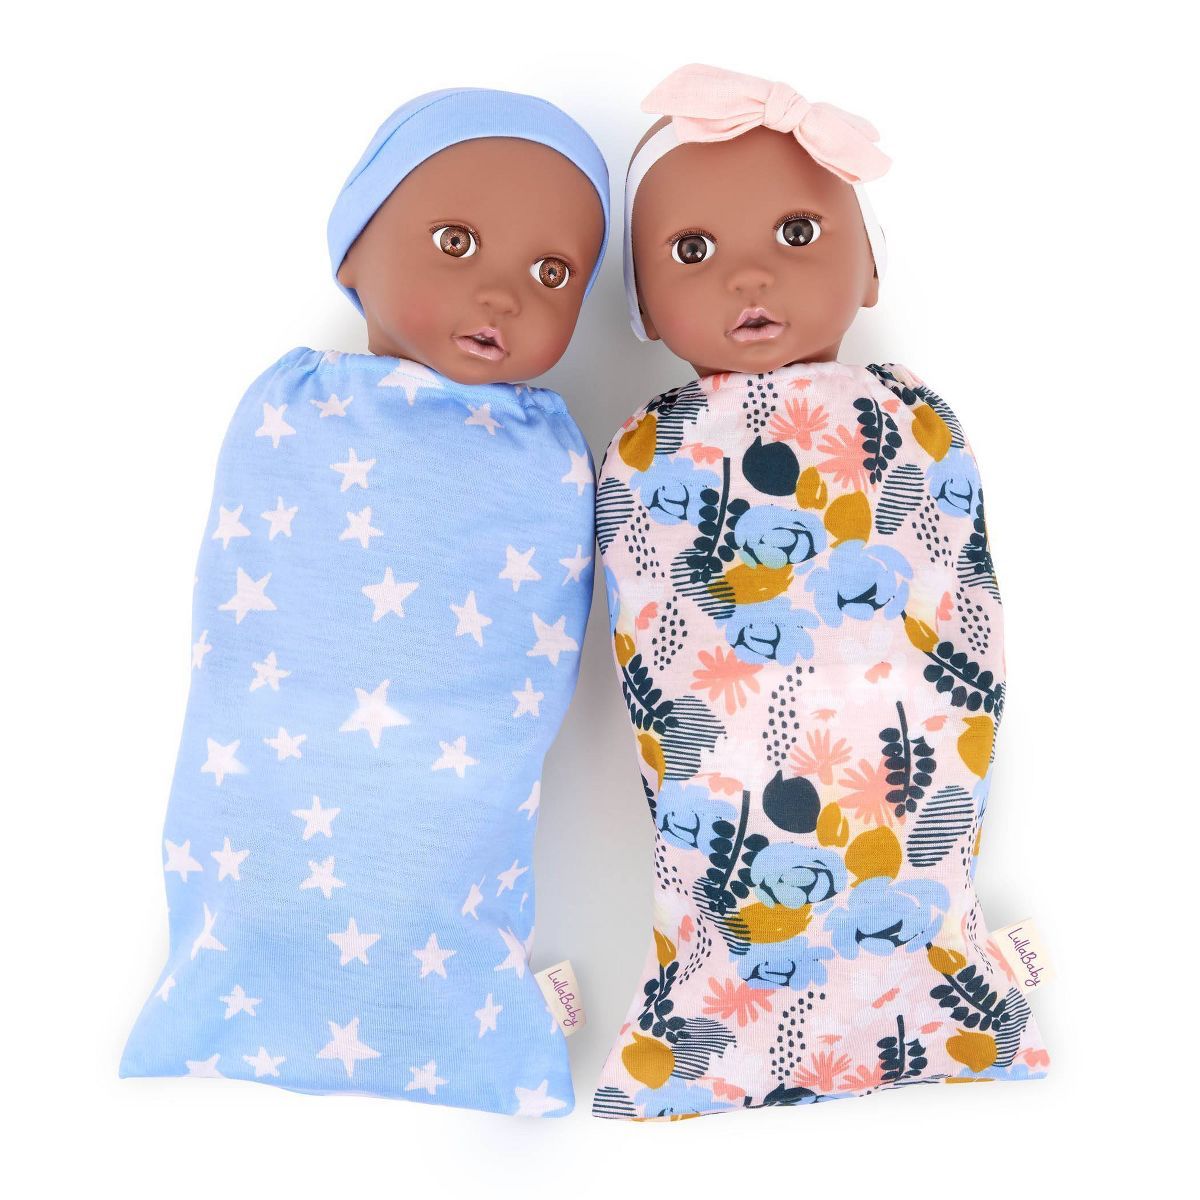 LullaBaby Twin Dolls Set With Floral And Star Sleep Sacks | Target